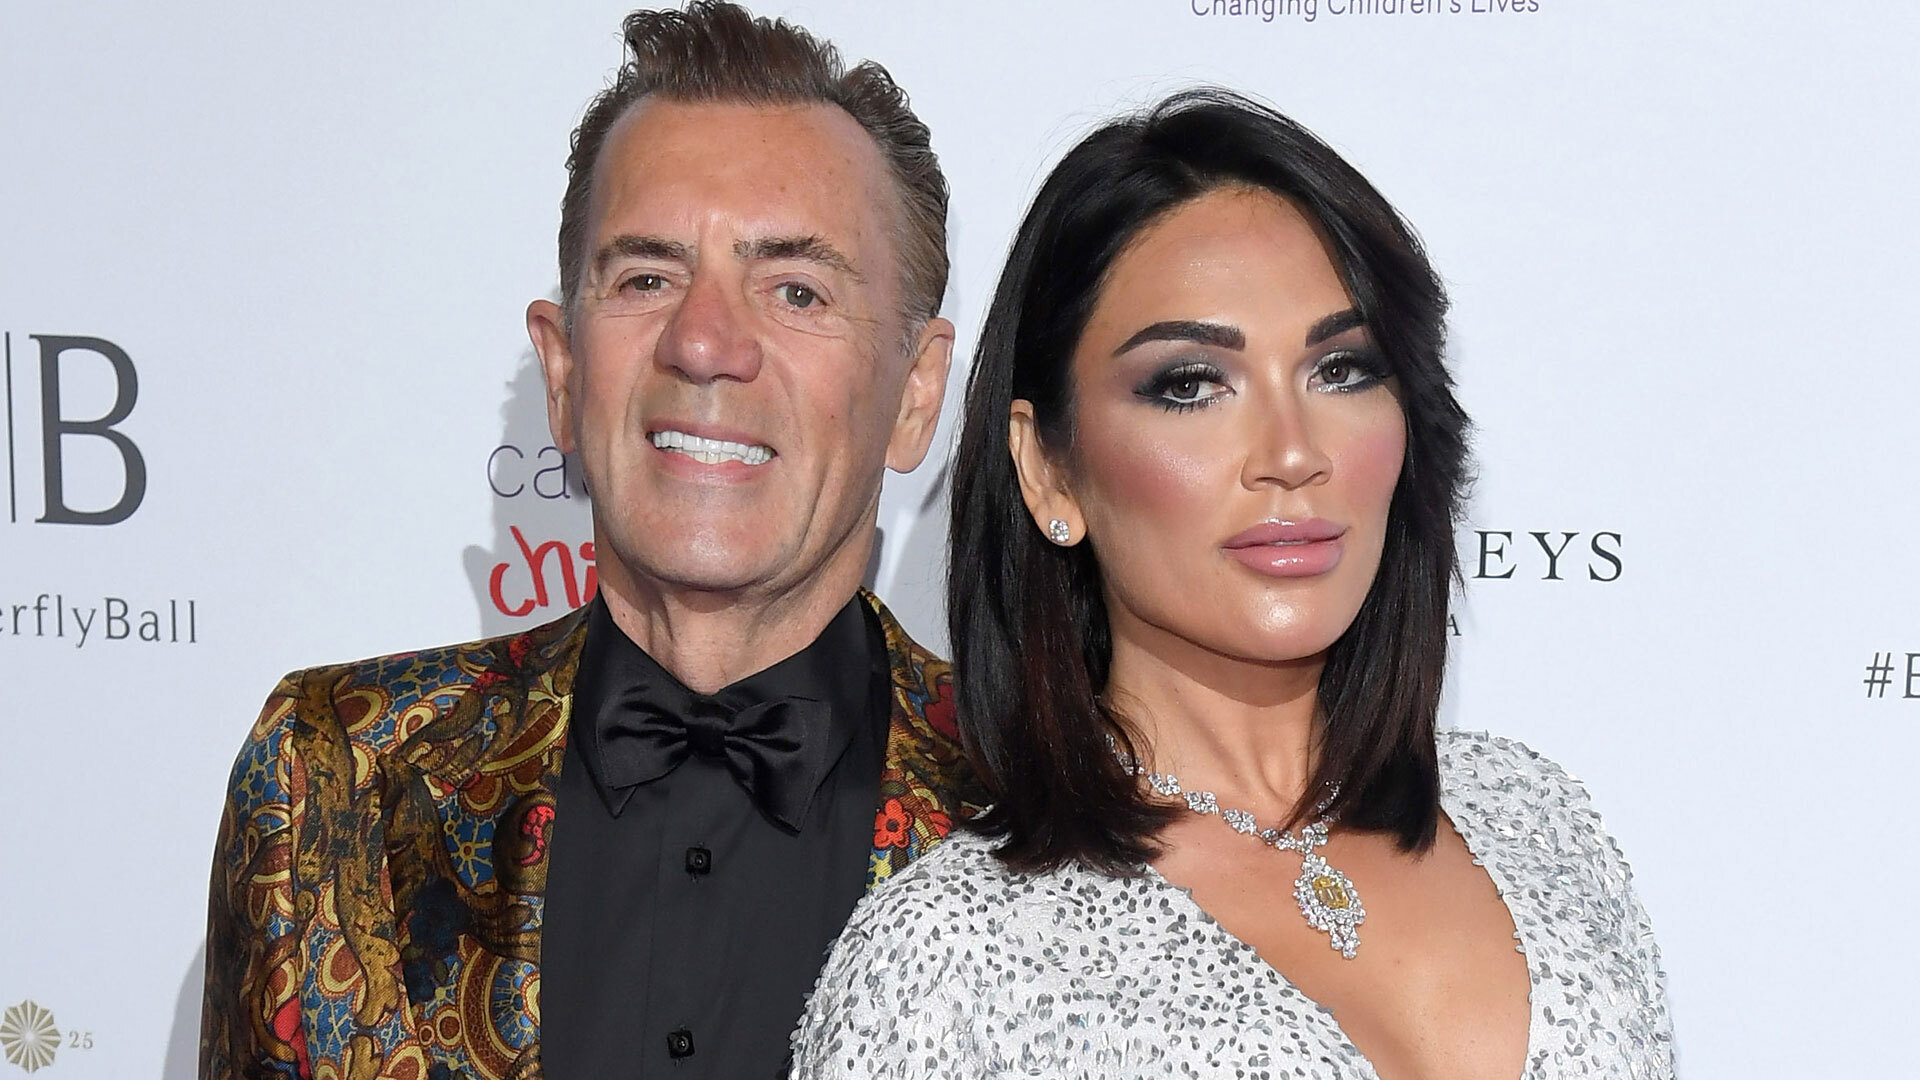 Duncan Bannatyne, Dragons’ Den star, flees Portugal with his wife after wildfire decimates Algarve